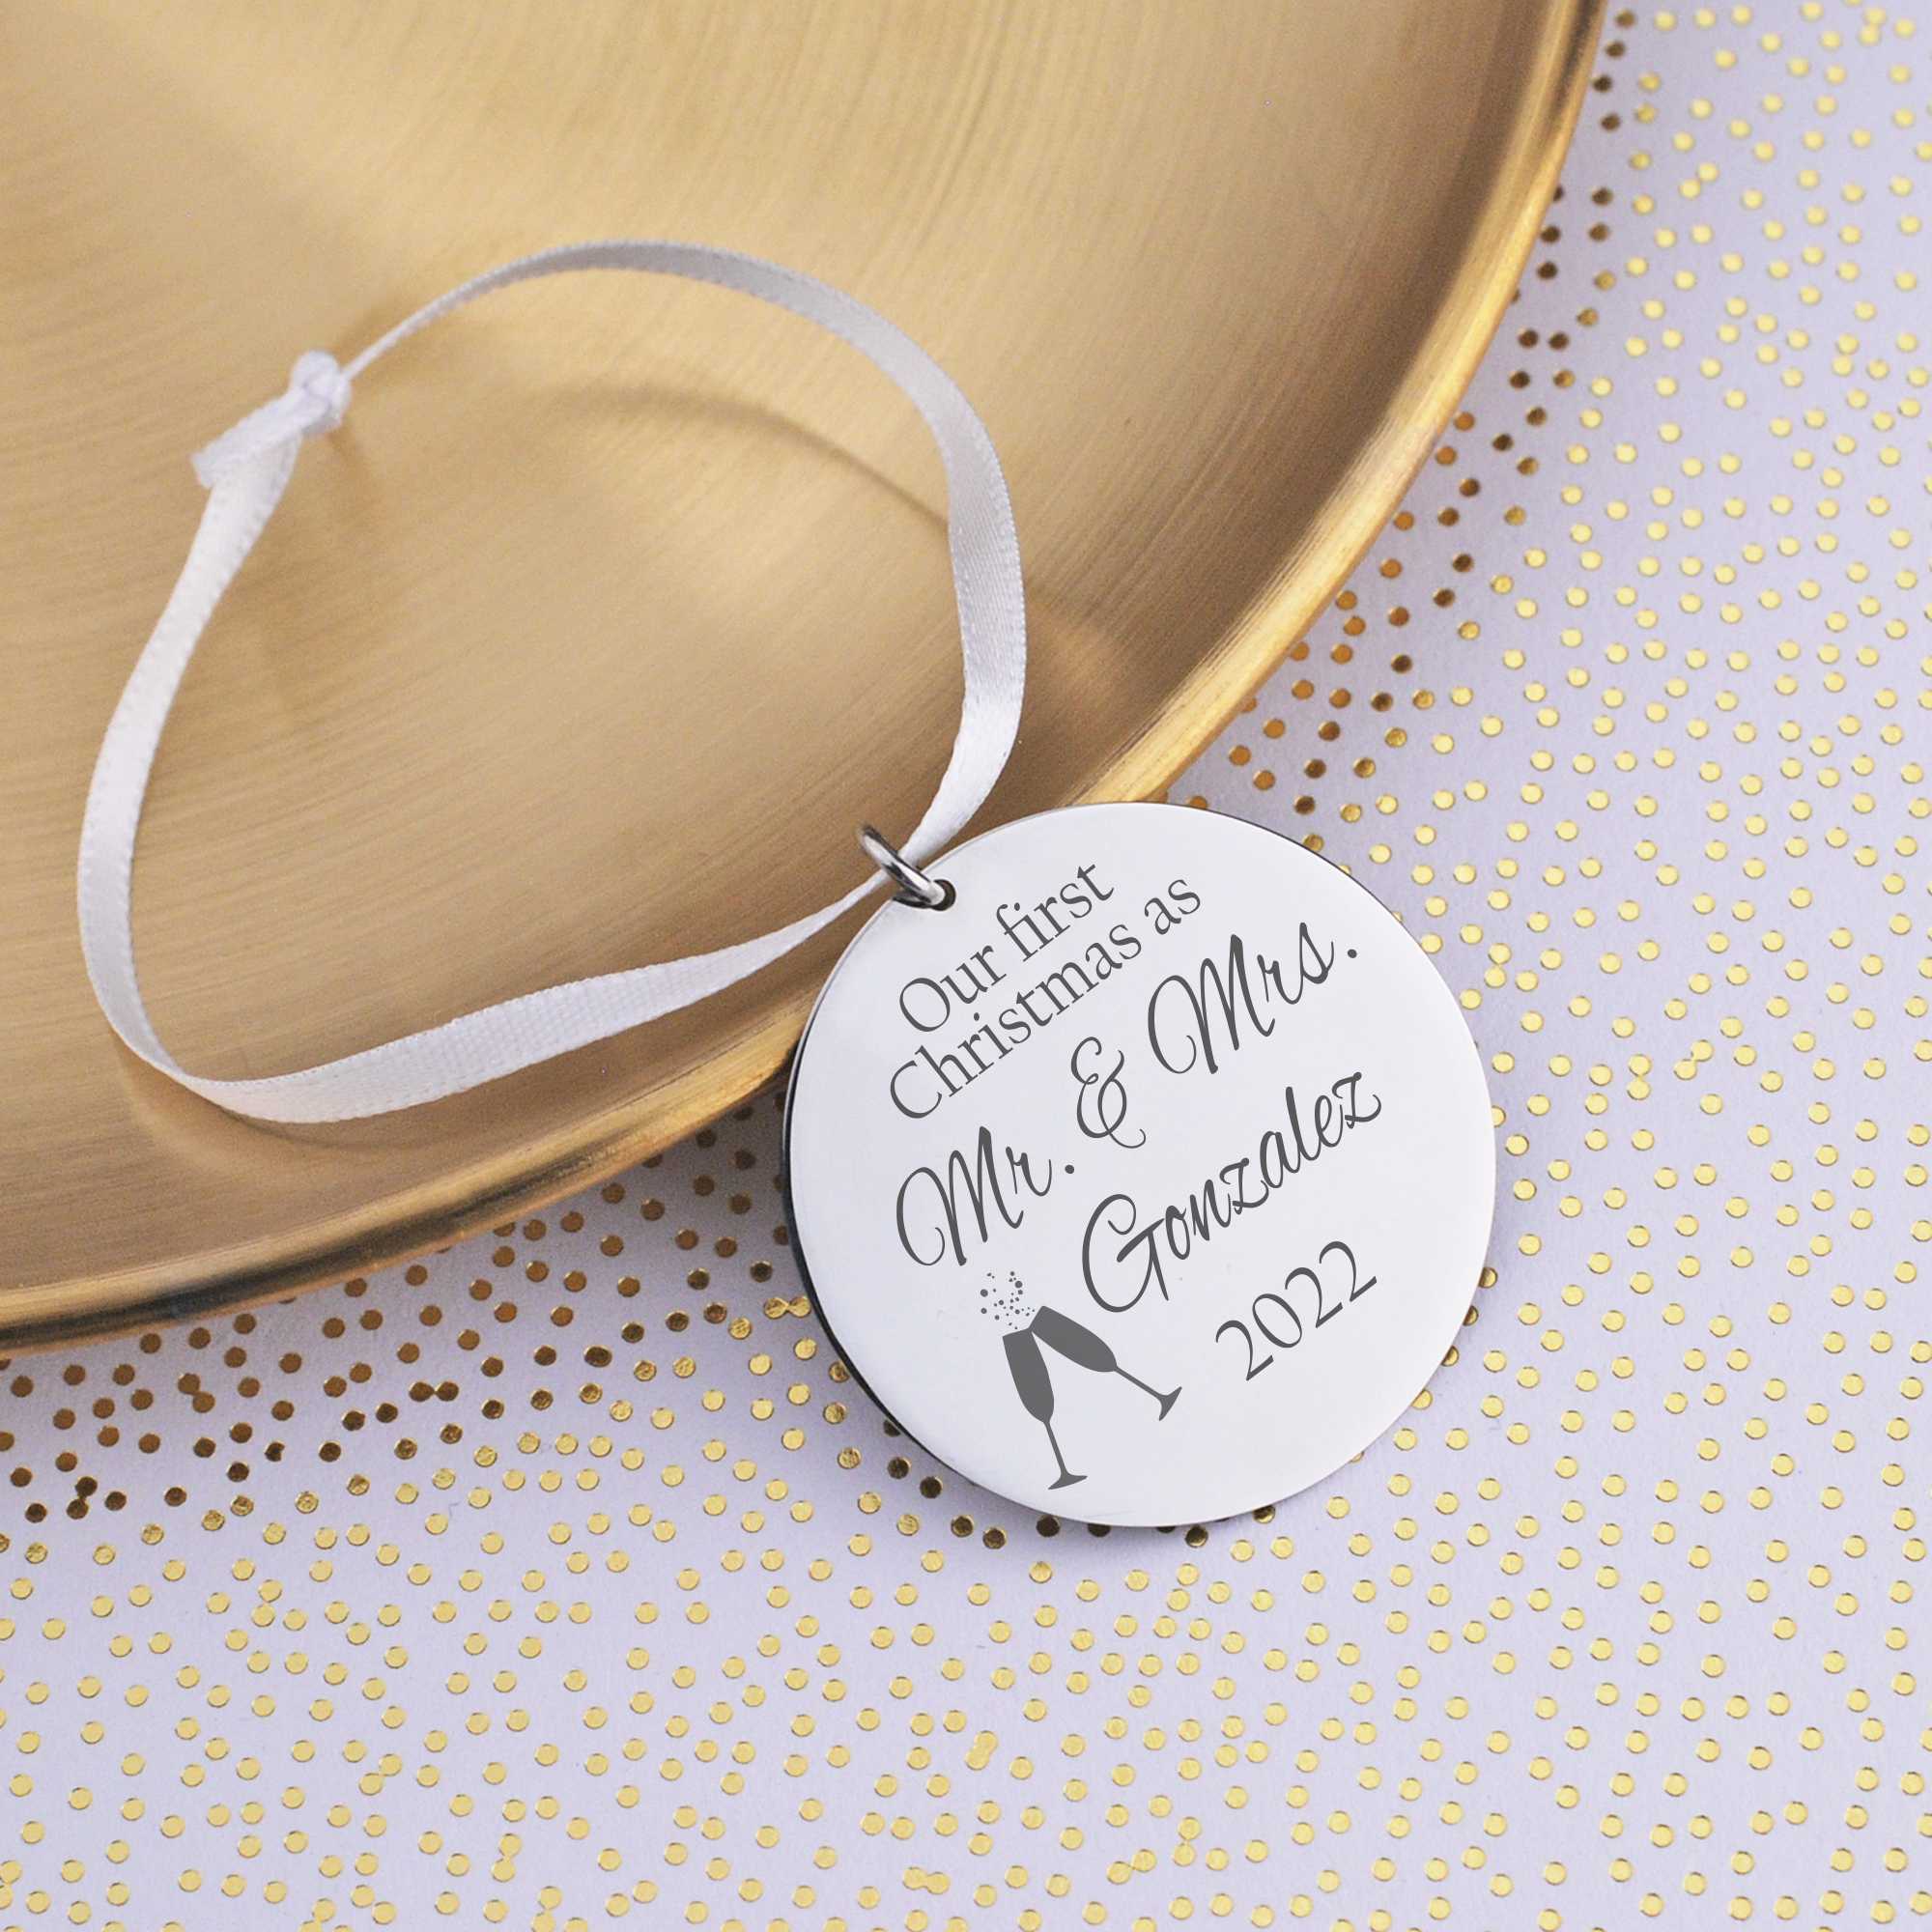 Our First Christmas as Mr. and Mrs Ornament 2023, 1st Christmas Married  Ornaments, Wedding Gifts for Couple Bride and Groom, Christmas Tree  Decoration, Bridal Shower Gift, Newlywed Gift